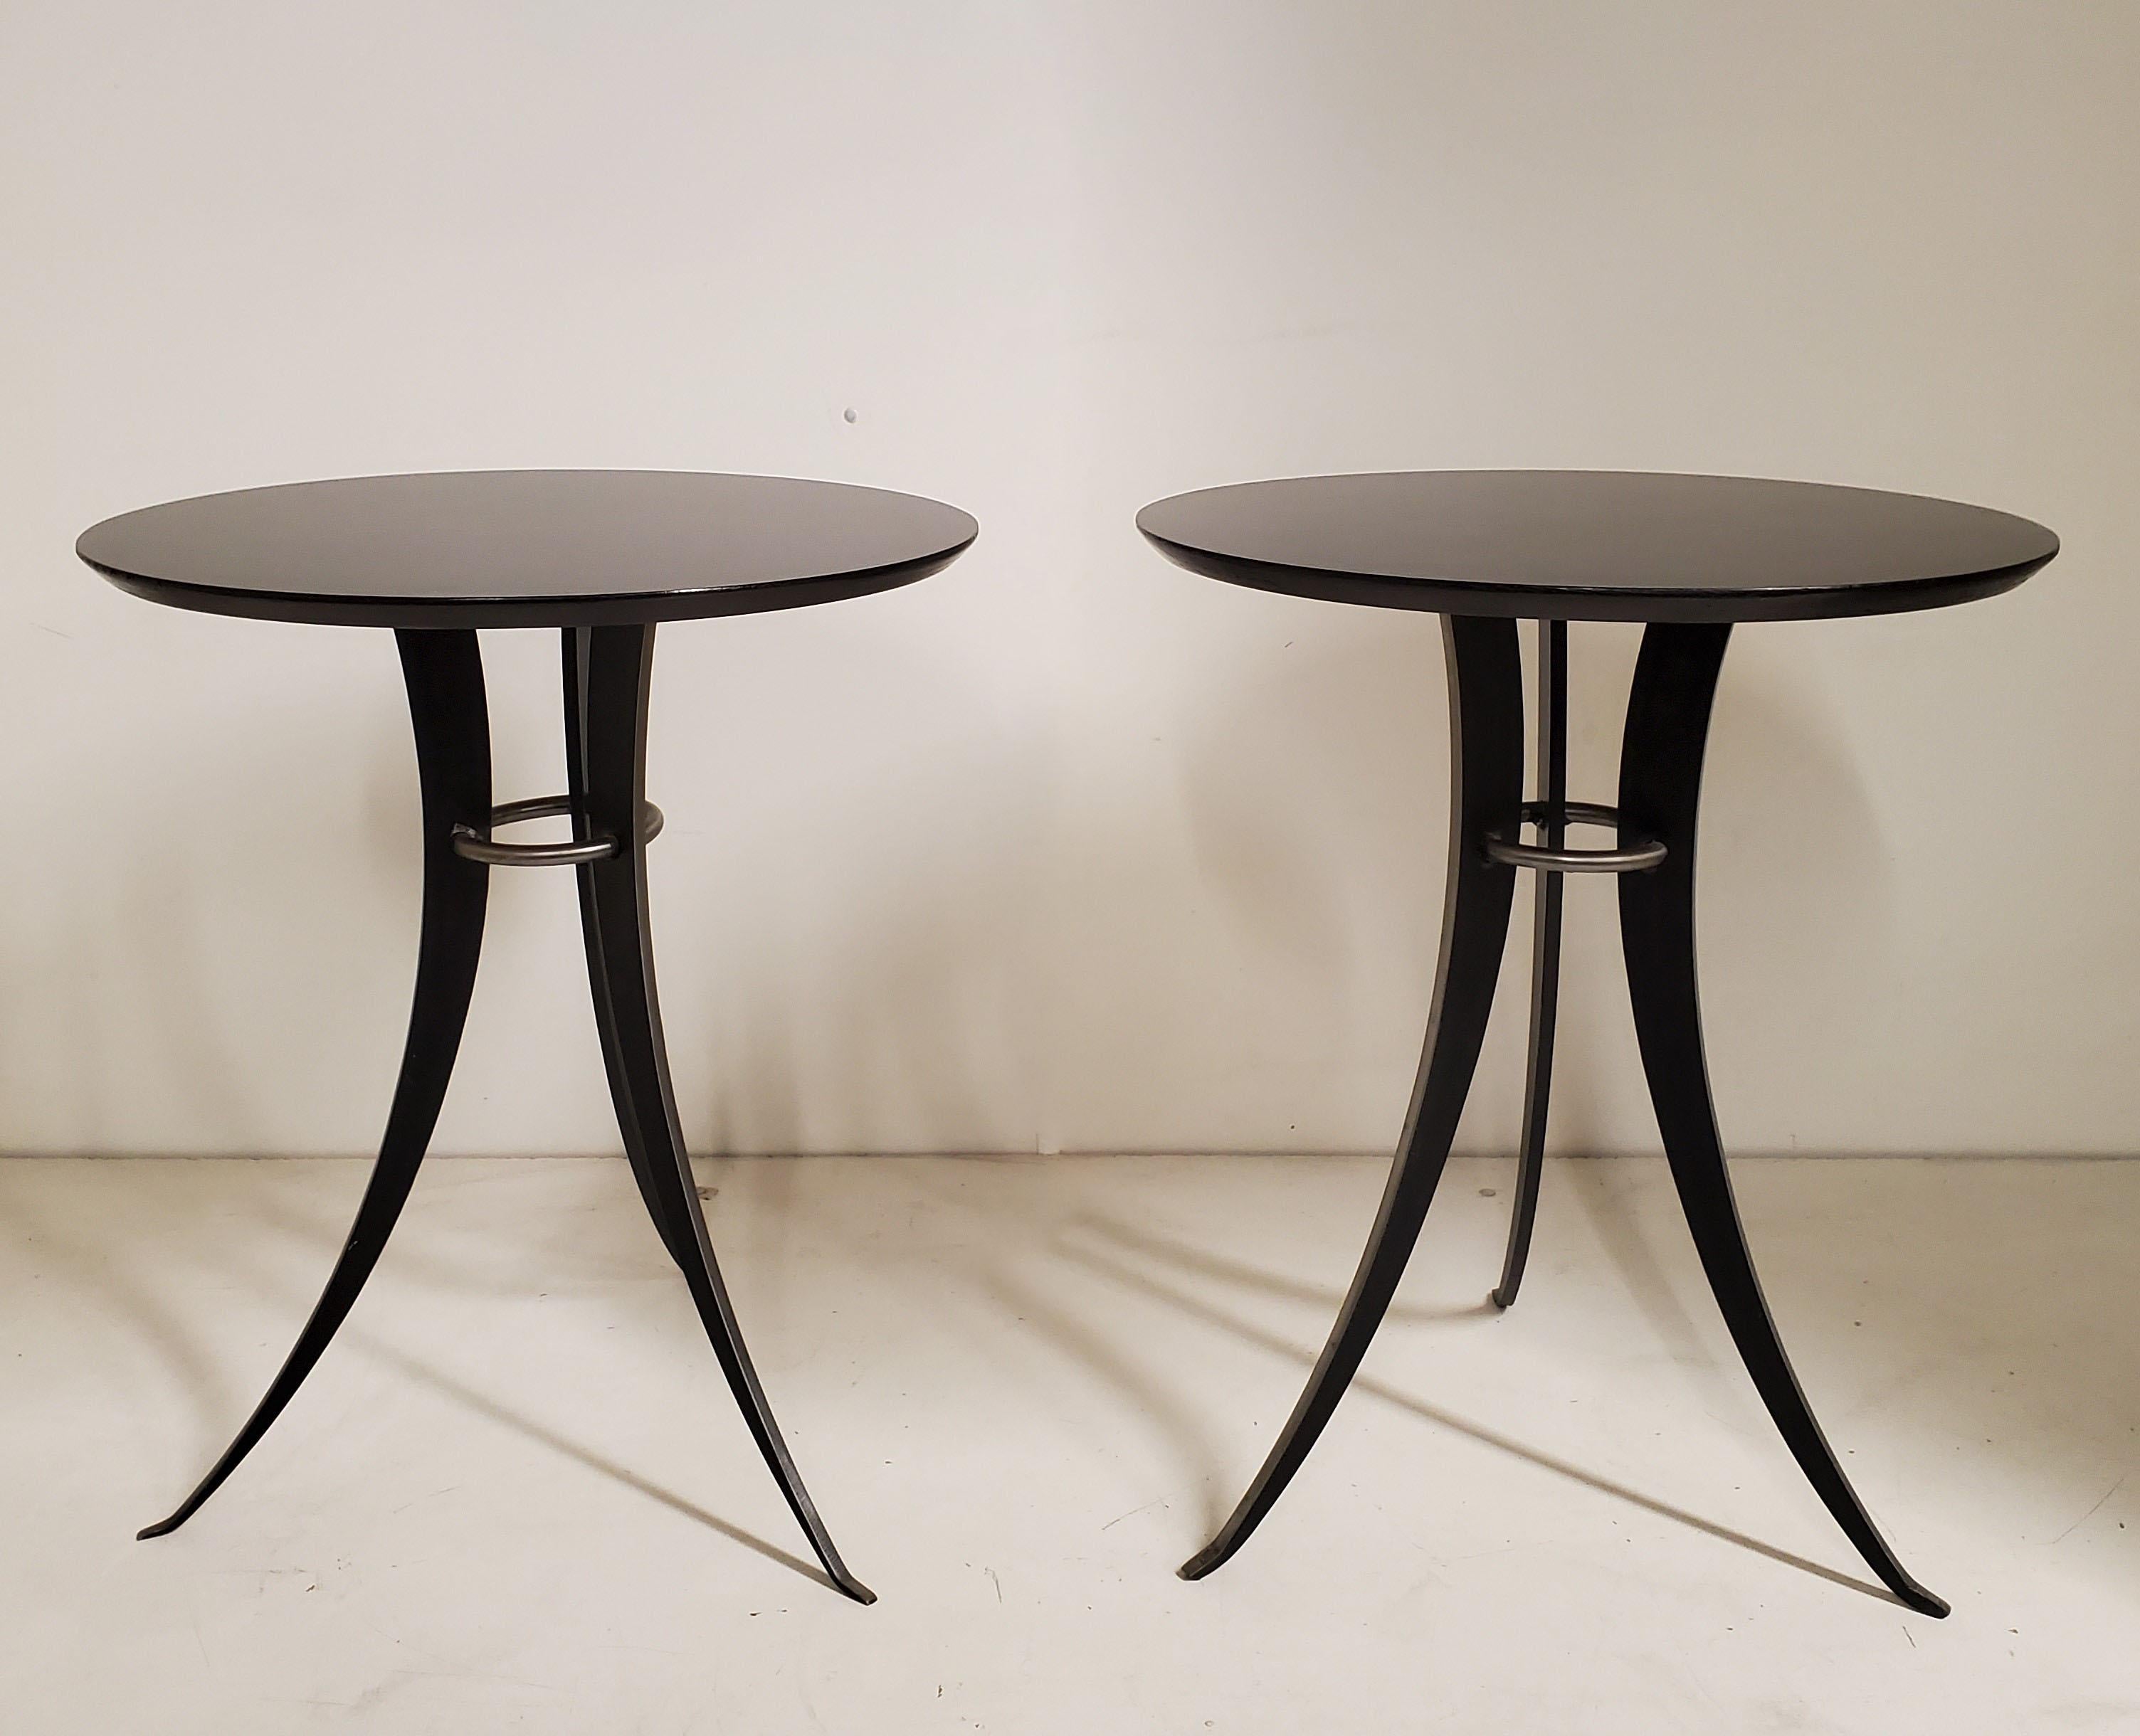 A Minimalist pair of tulip design, splay leg end tables in steel and lacquered wood. 
The austere and streamline design make this pair appealing in any decor.
These can be used as side or drinks tables in any room setting Ex: Art Deco, Hollywood